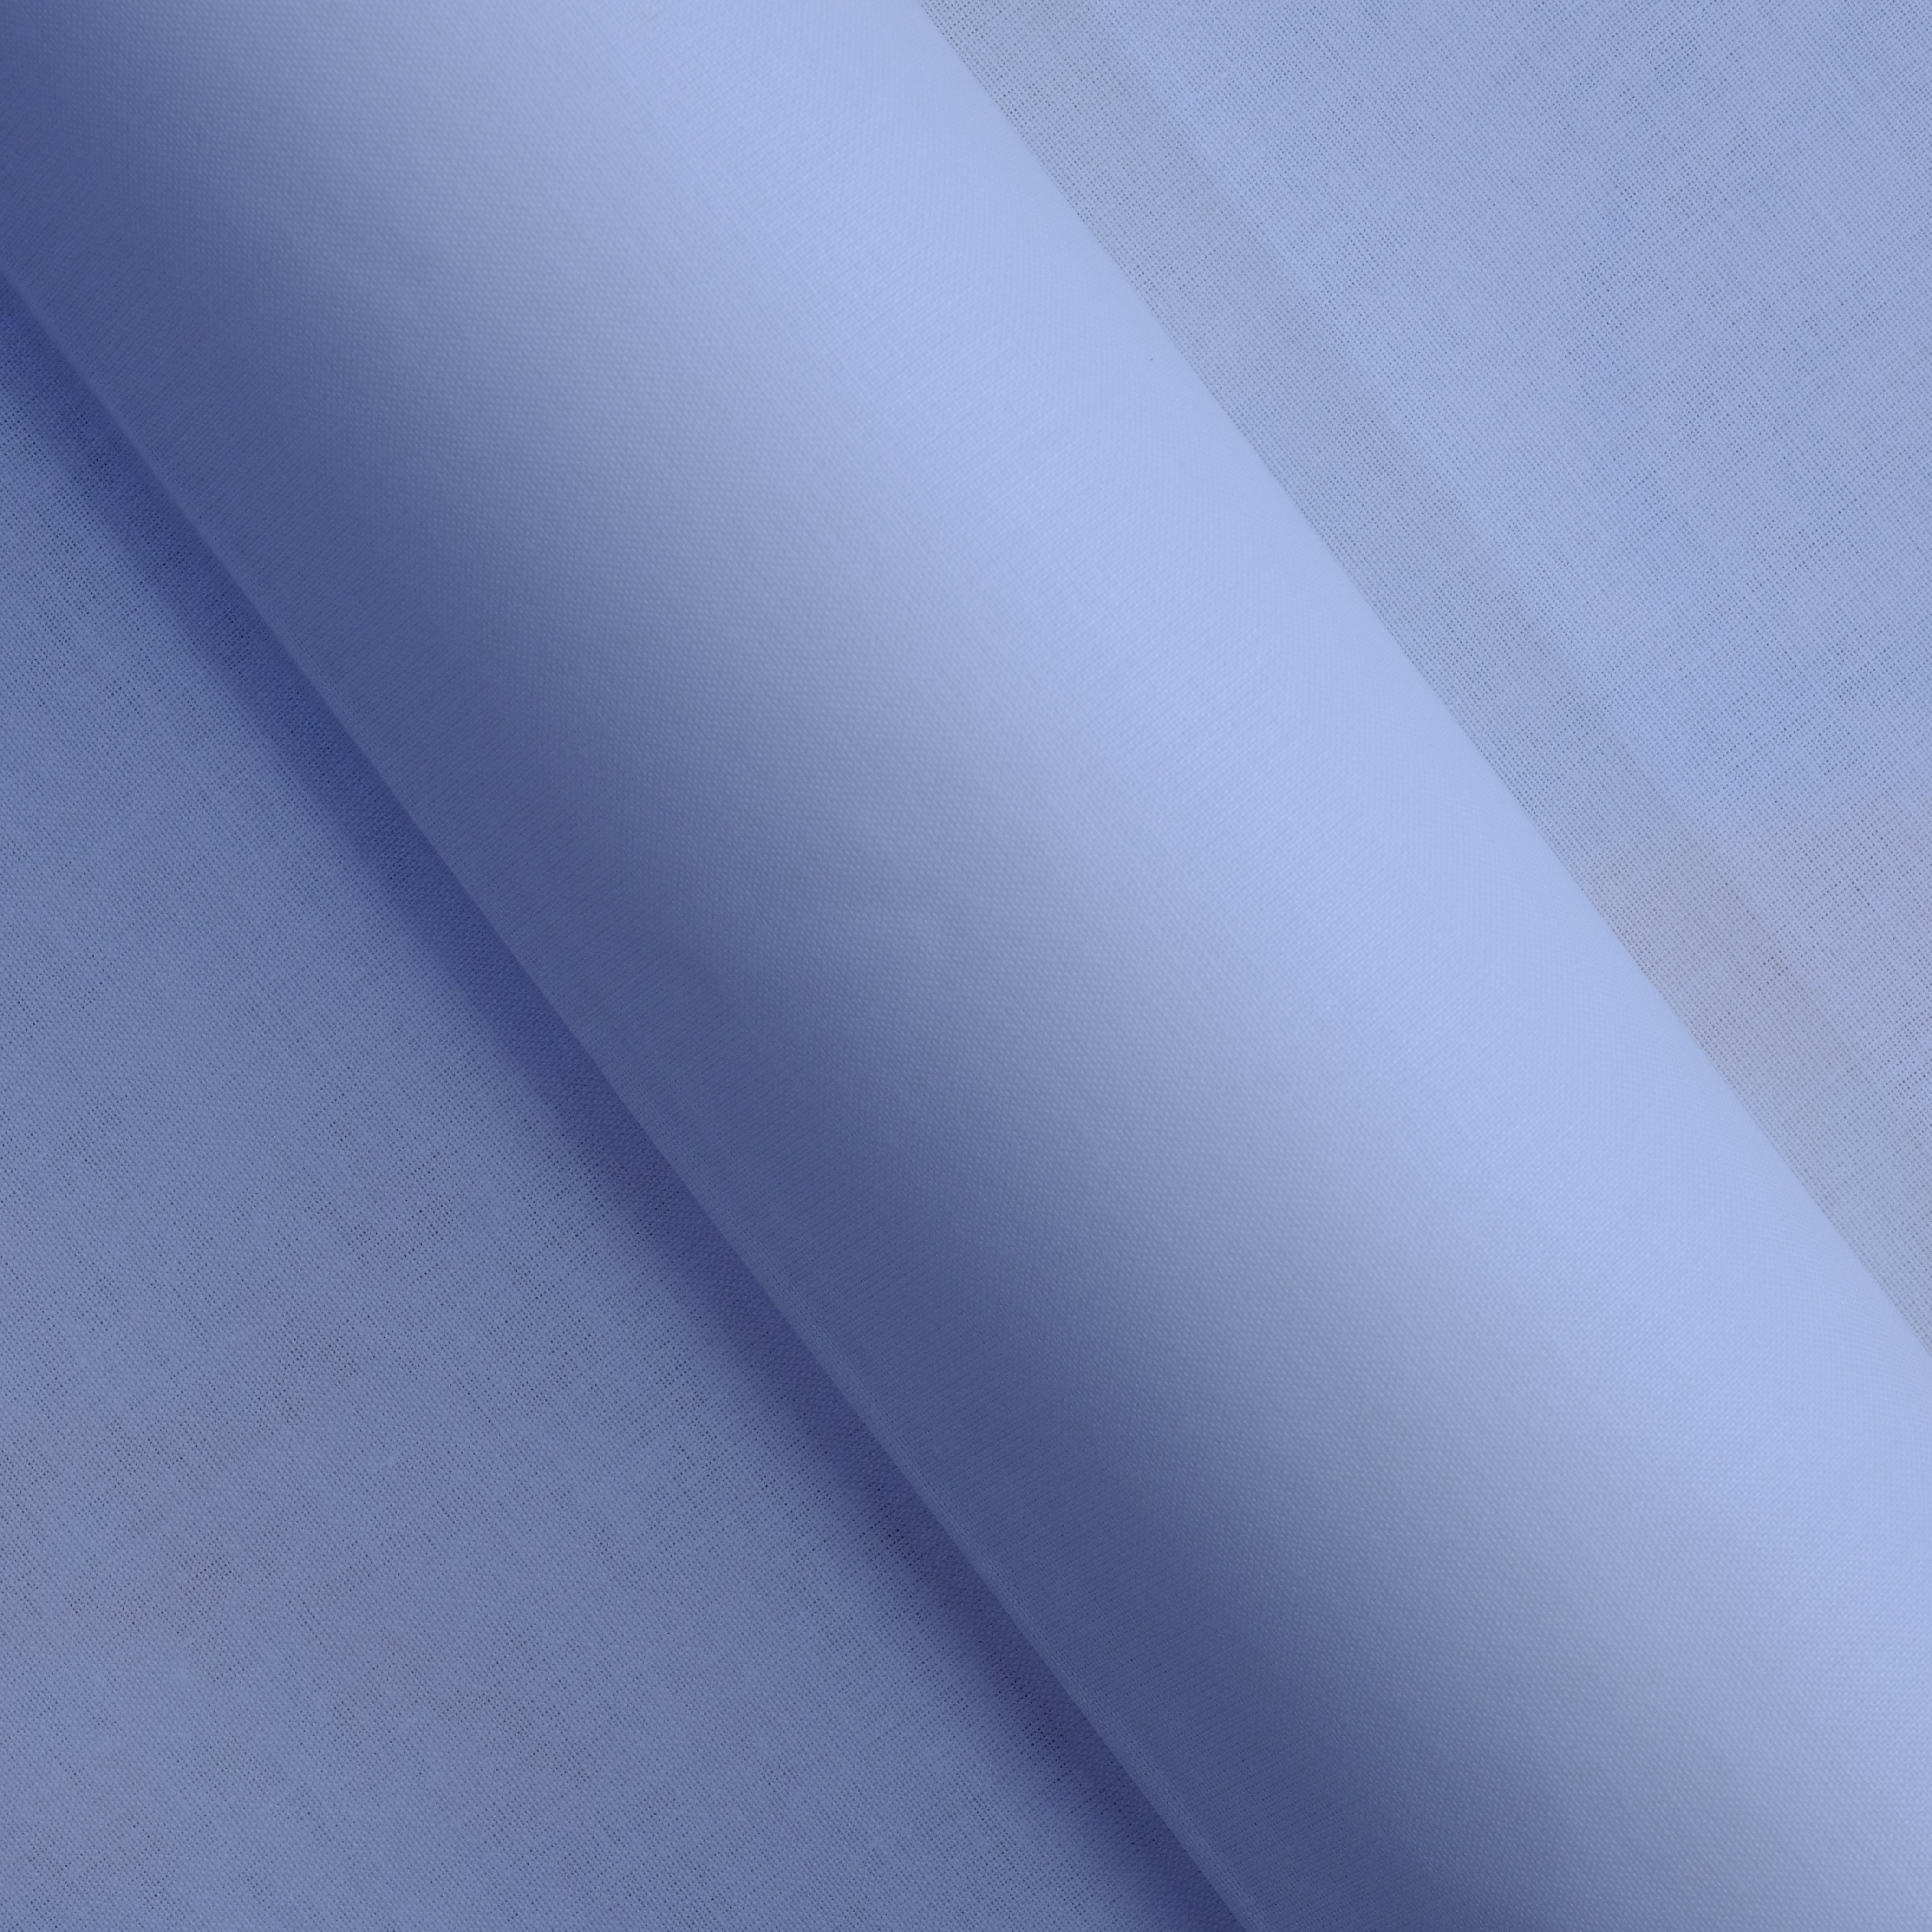 White 100% Pure Paper Cotton Plain Fabric, Minister Look.